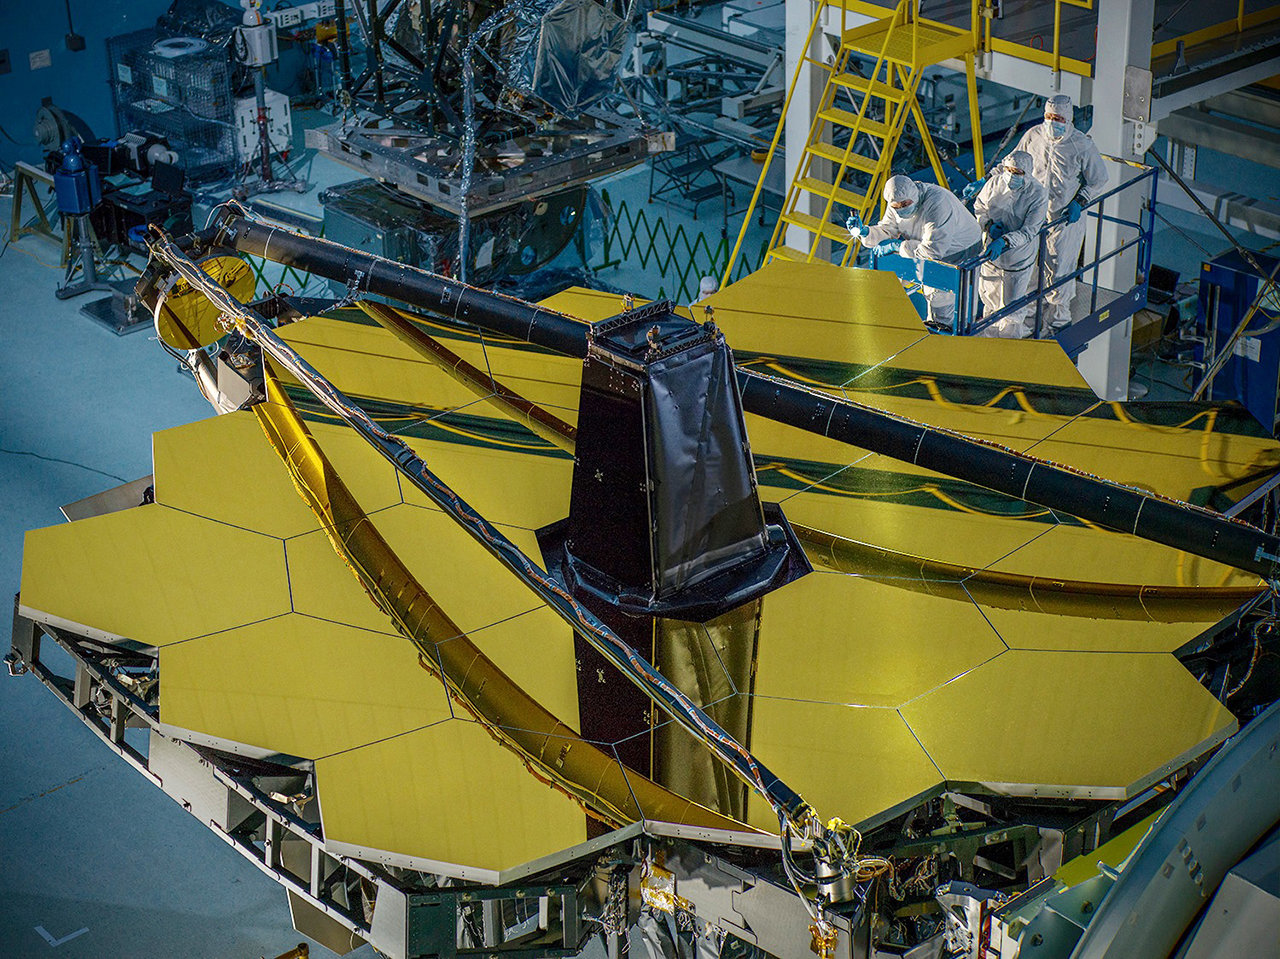 At a Goddard cleanroom, technicians unveil the James Webb Observatory’s segmented mirror.